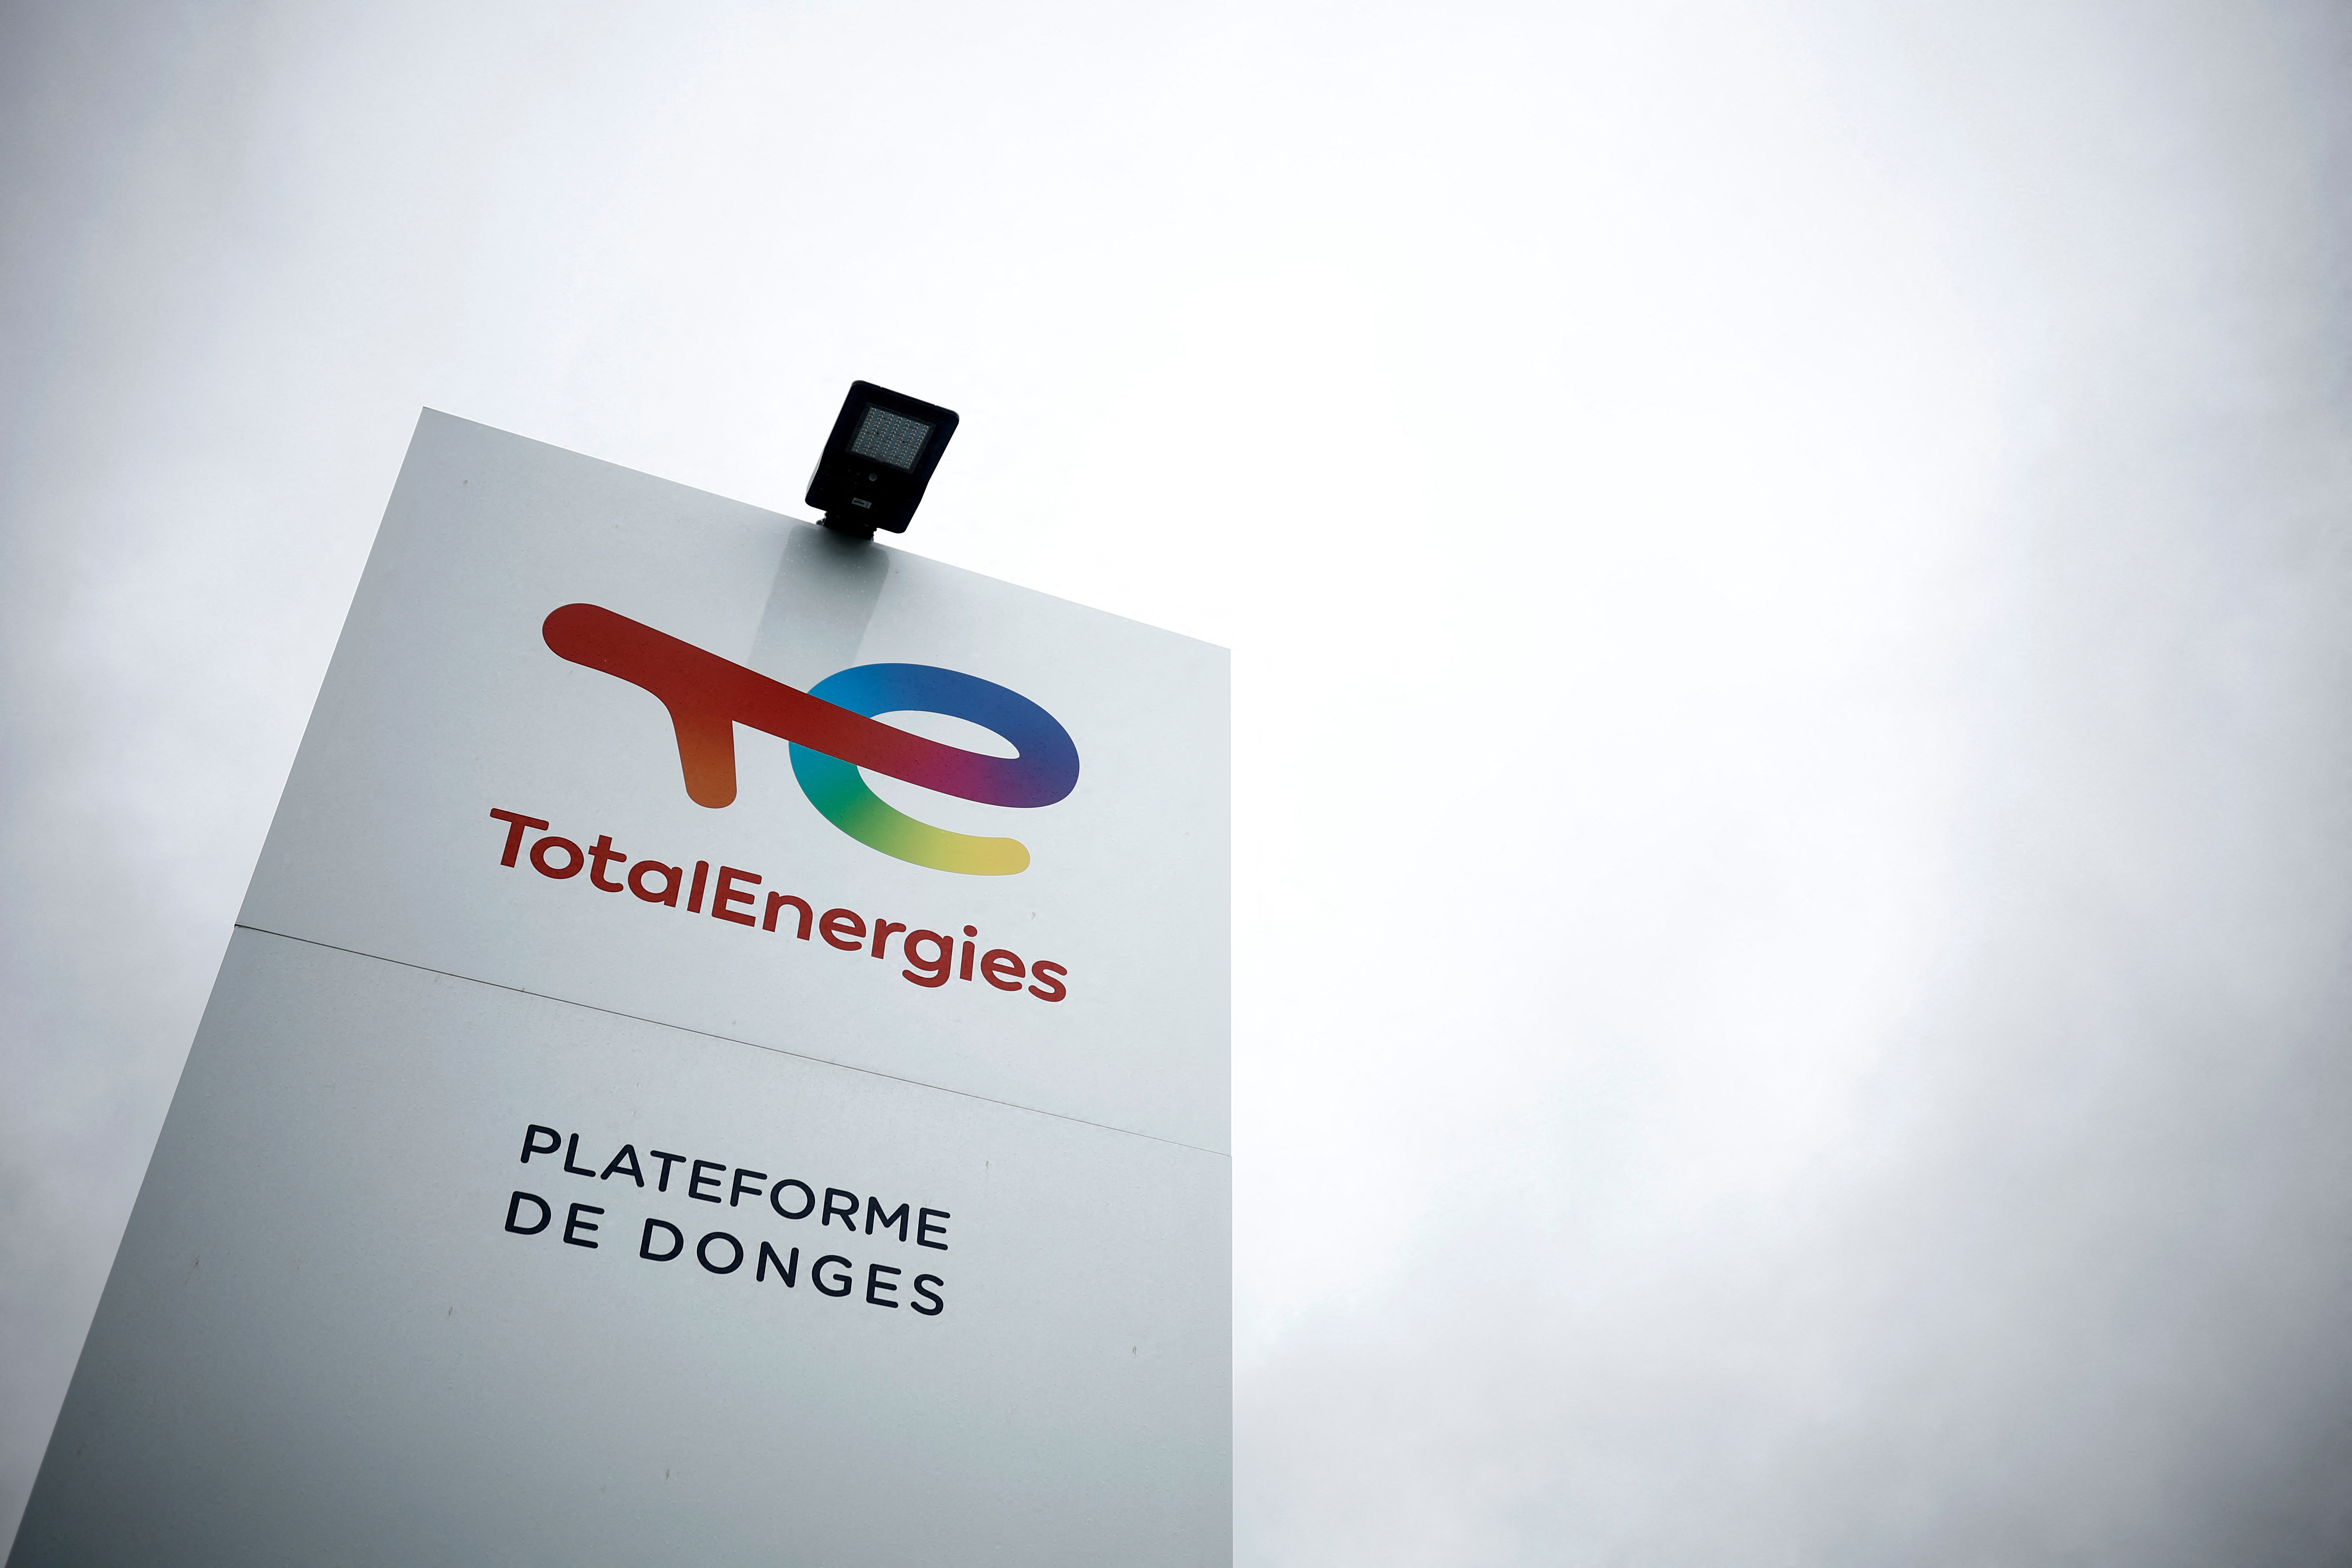 The logo of TotalEnergies is seen at the French oil giant TotalEnergies refinery in Donges